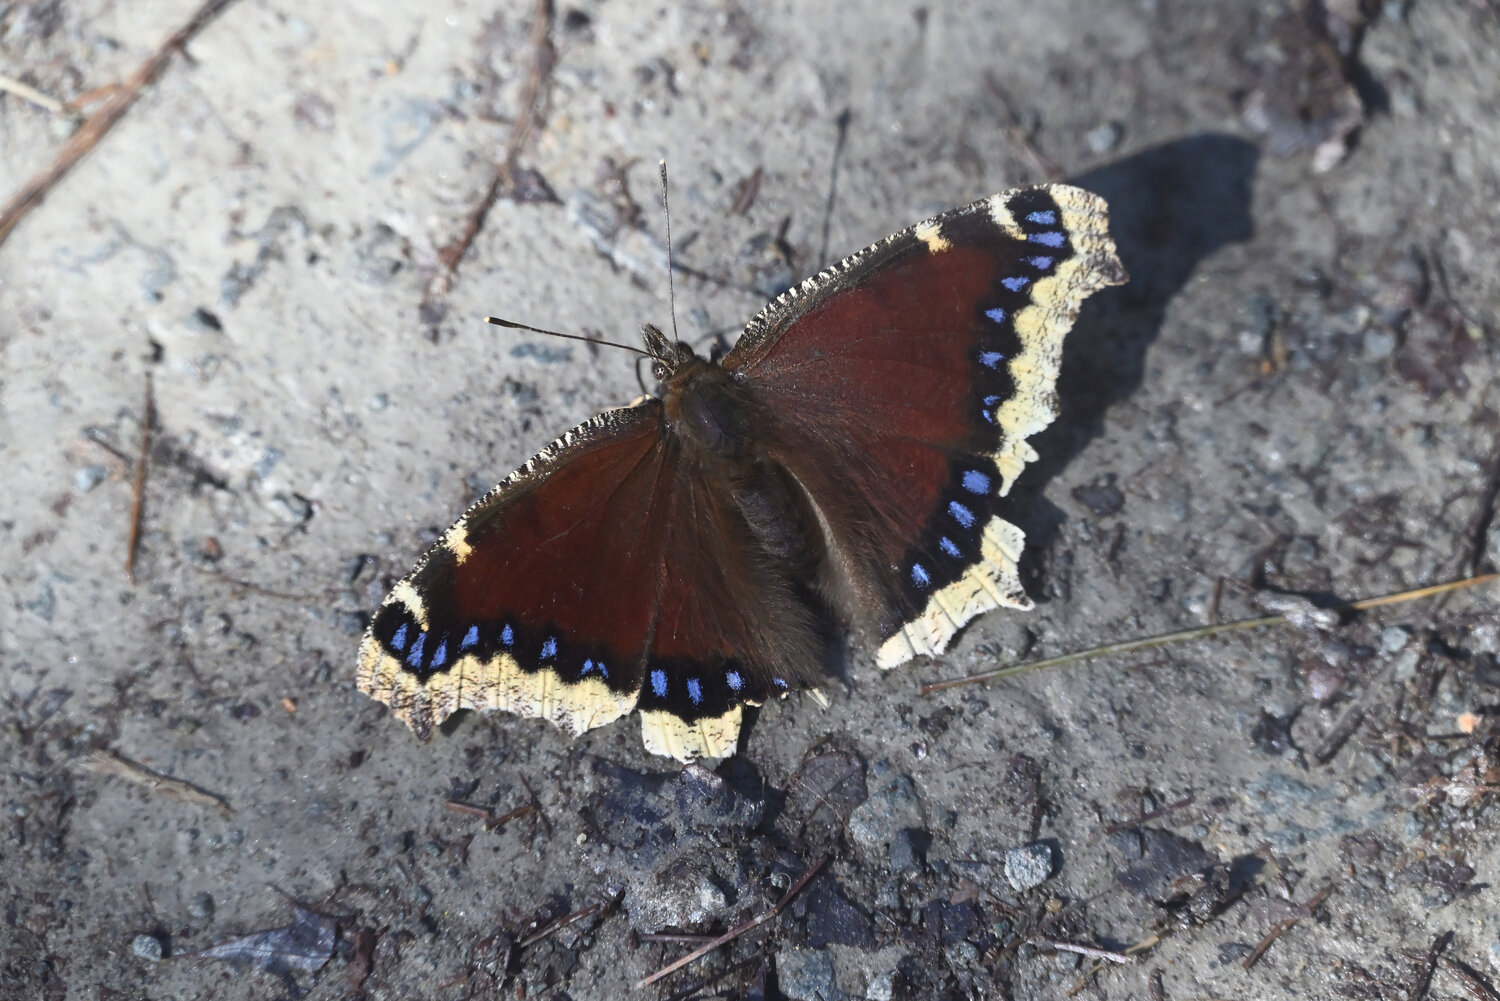 This mourning cloak was seen early in April near my home, about the same time the wood frogs started to call. This species has blue spots, as do some other species of butterflies; what sets the mourning cloak apart from the other species is the yellow fringe on the trailing edge of the wings. Many mourning cloaks, like this one, have slightly tattered wings. ..In the spring, look for the butterflies along sunny edges of forest or along trails. They also might be sipping sap from holes in trees.